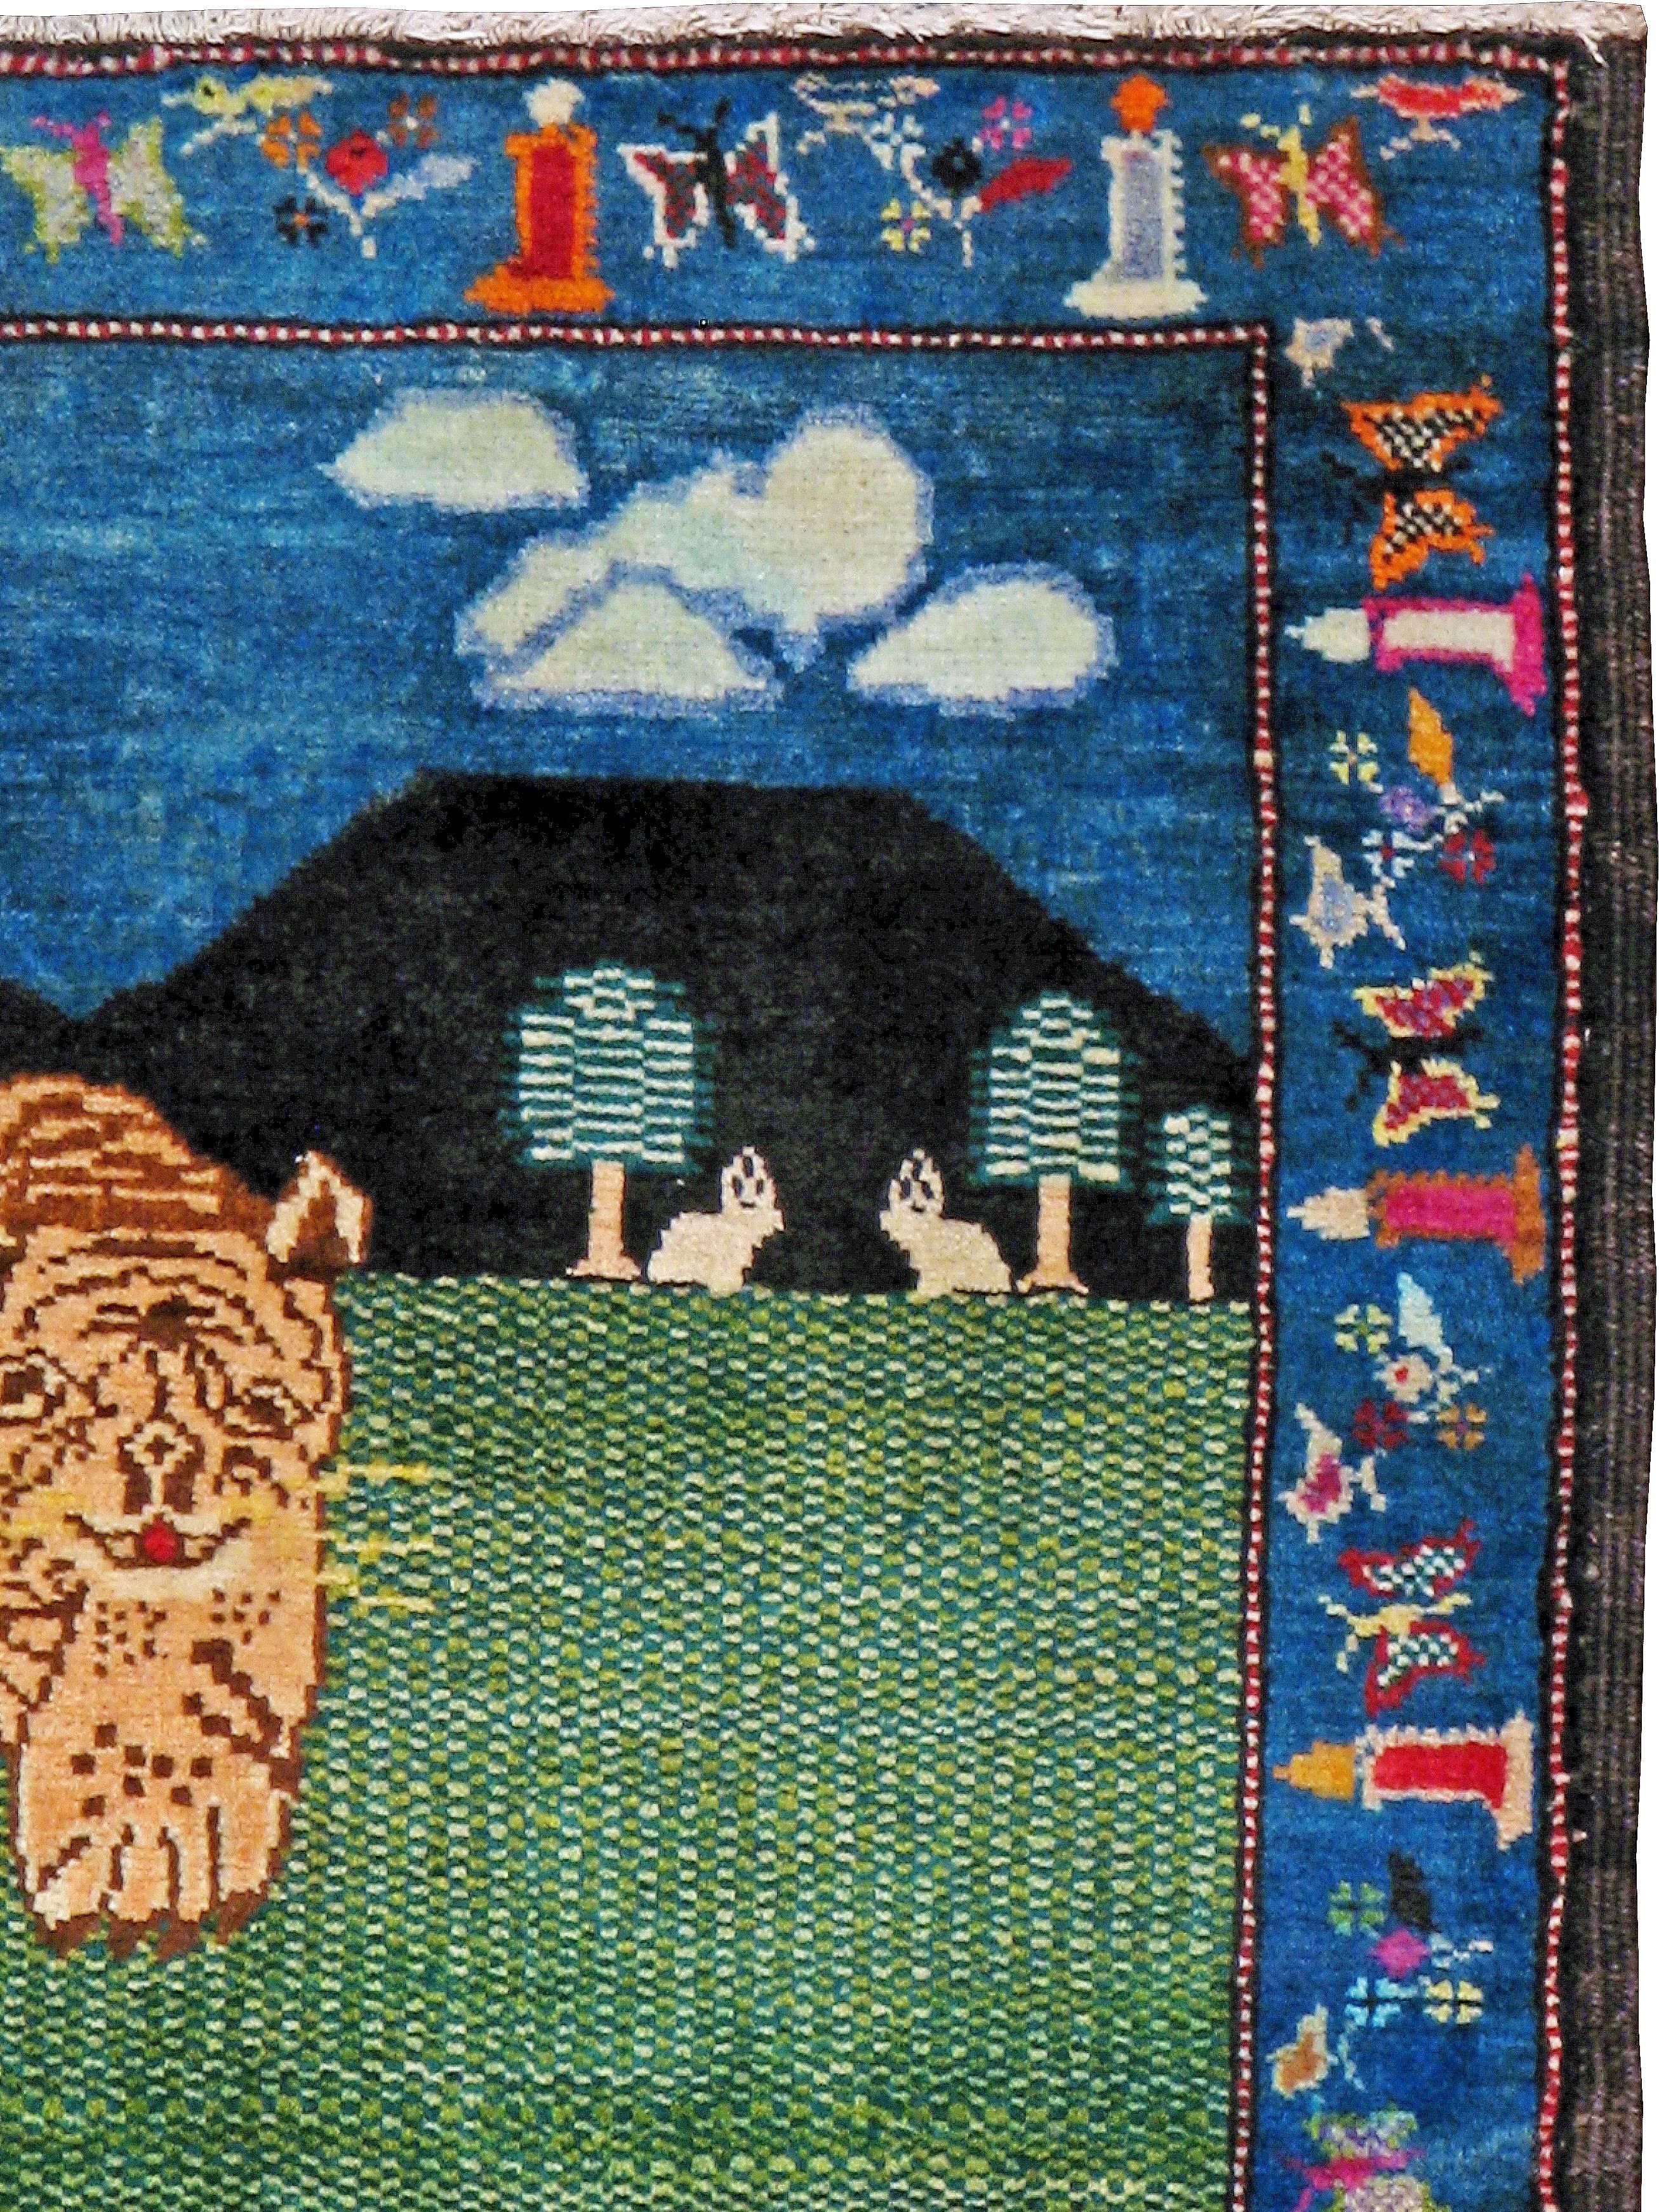 An antique Persian Malayer from the second quarter of the 20th century with a pictorial design of a tiger.